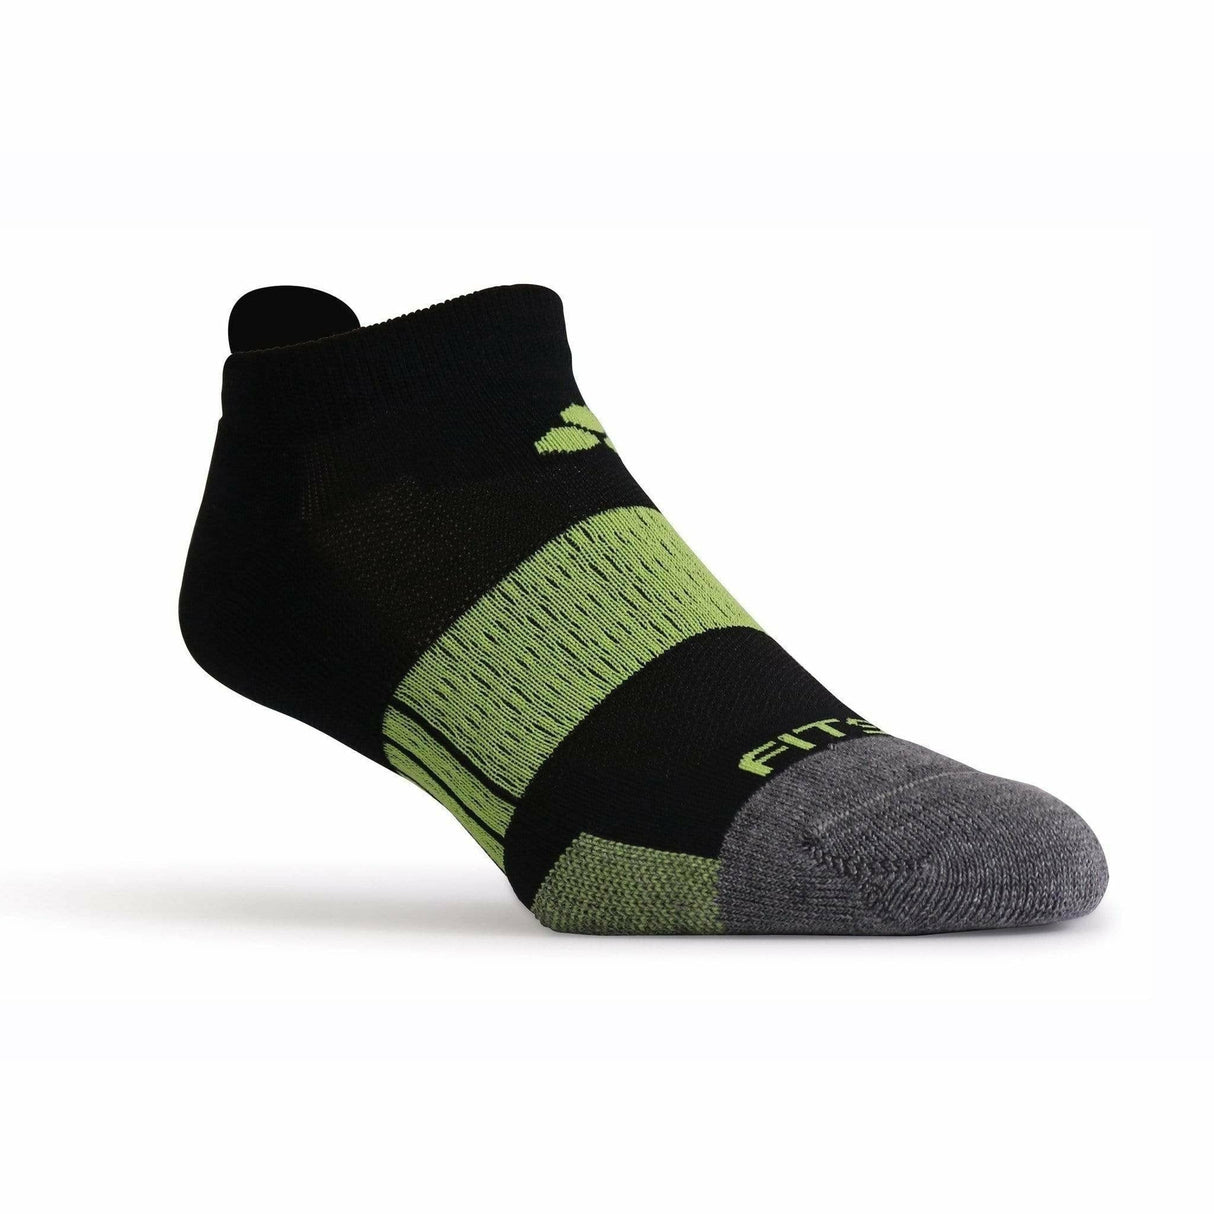 Fitsok NP7 Midweight No Show Tab Socks  -  Small / Black/Lime